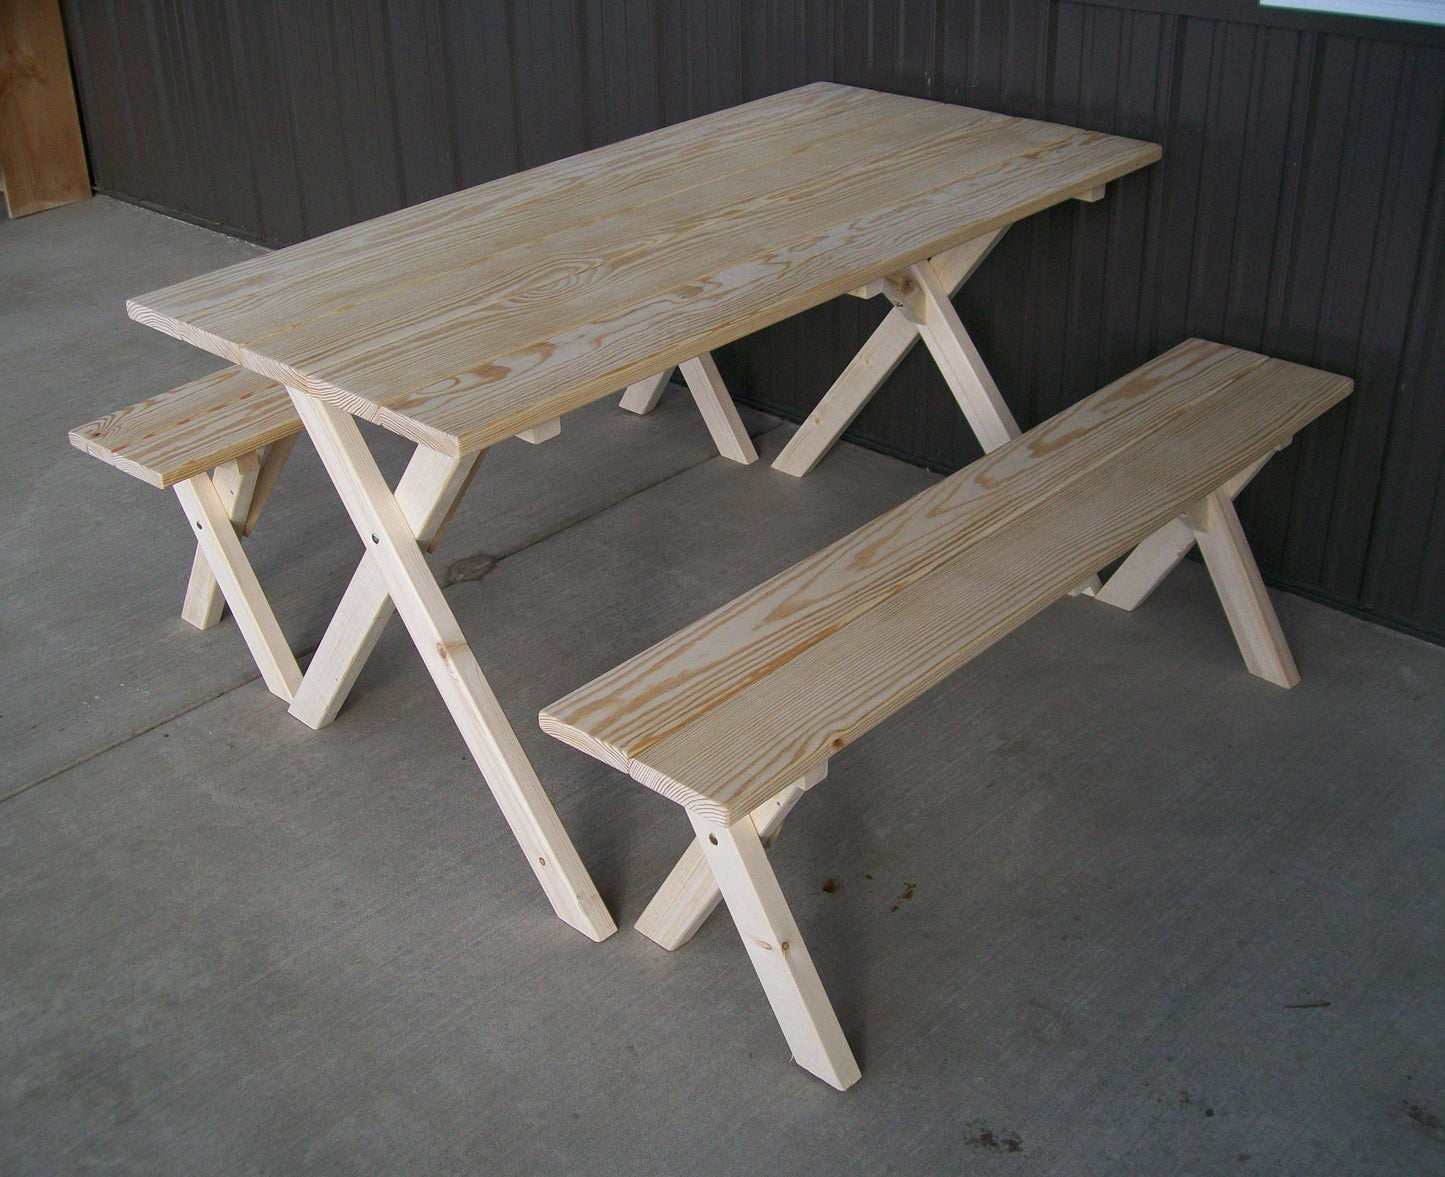 A&L Furniture Co. Yellow Pine 5' Economy Table with 2 benches - LEAD TIME TO SHIP 10 BUSINESS DAYS